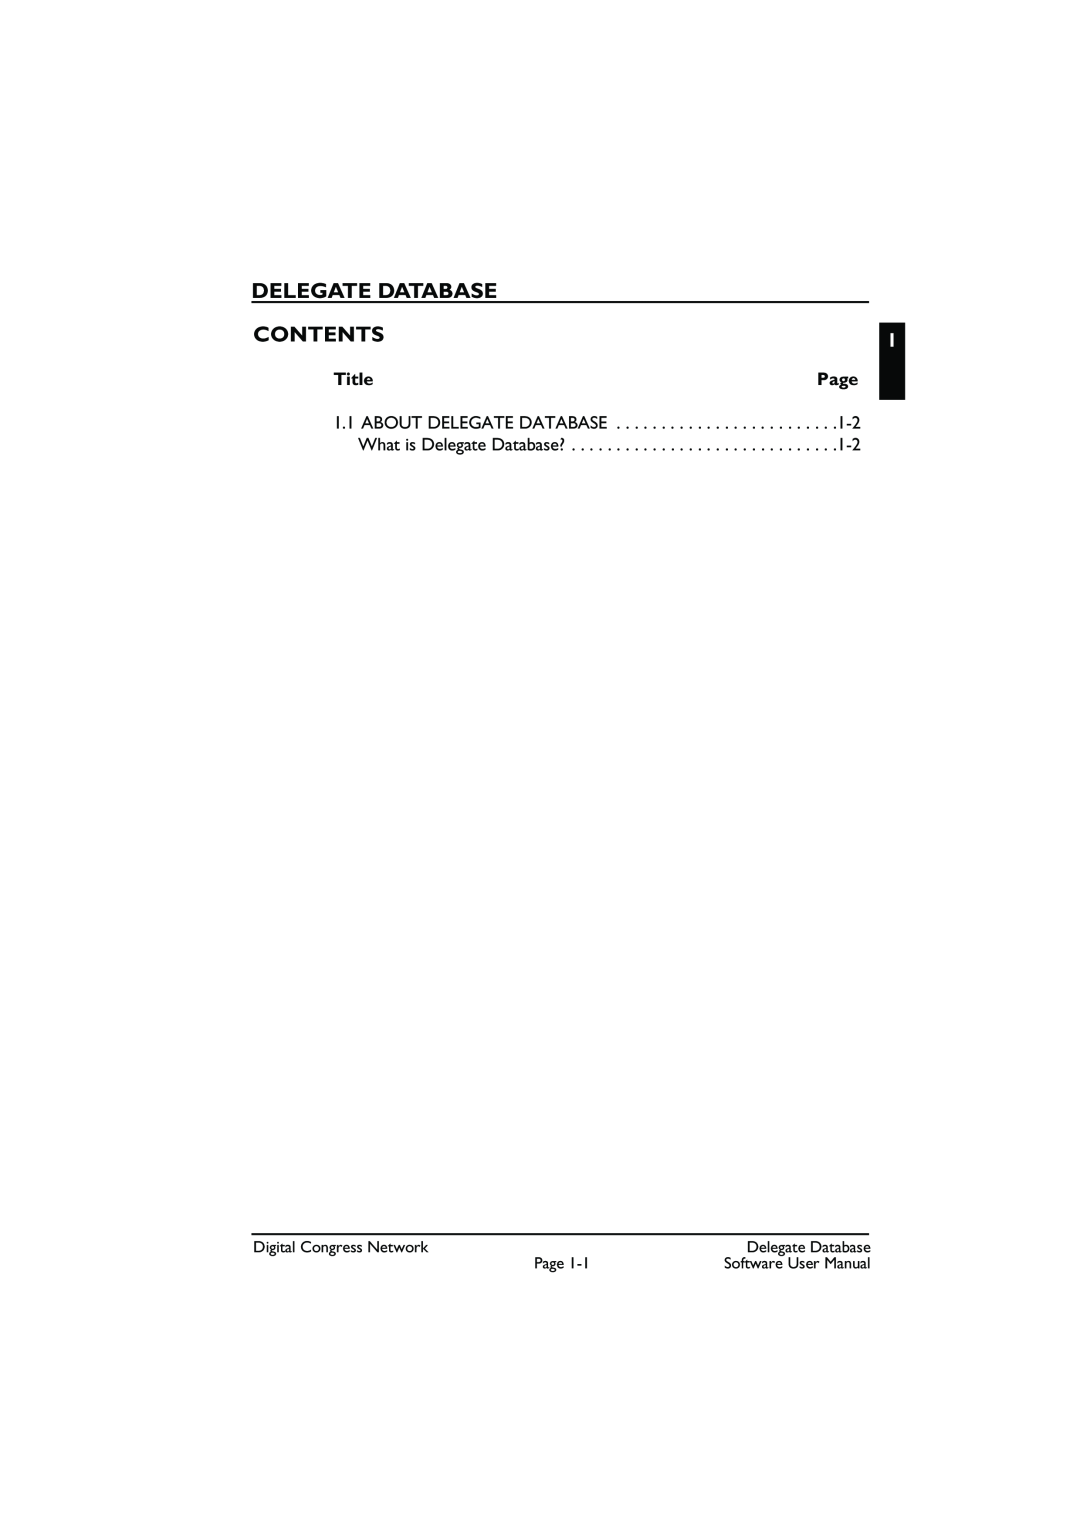 Bosch Appliances LBB3580 user manual Delegate Database, Contents, Title, Page 